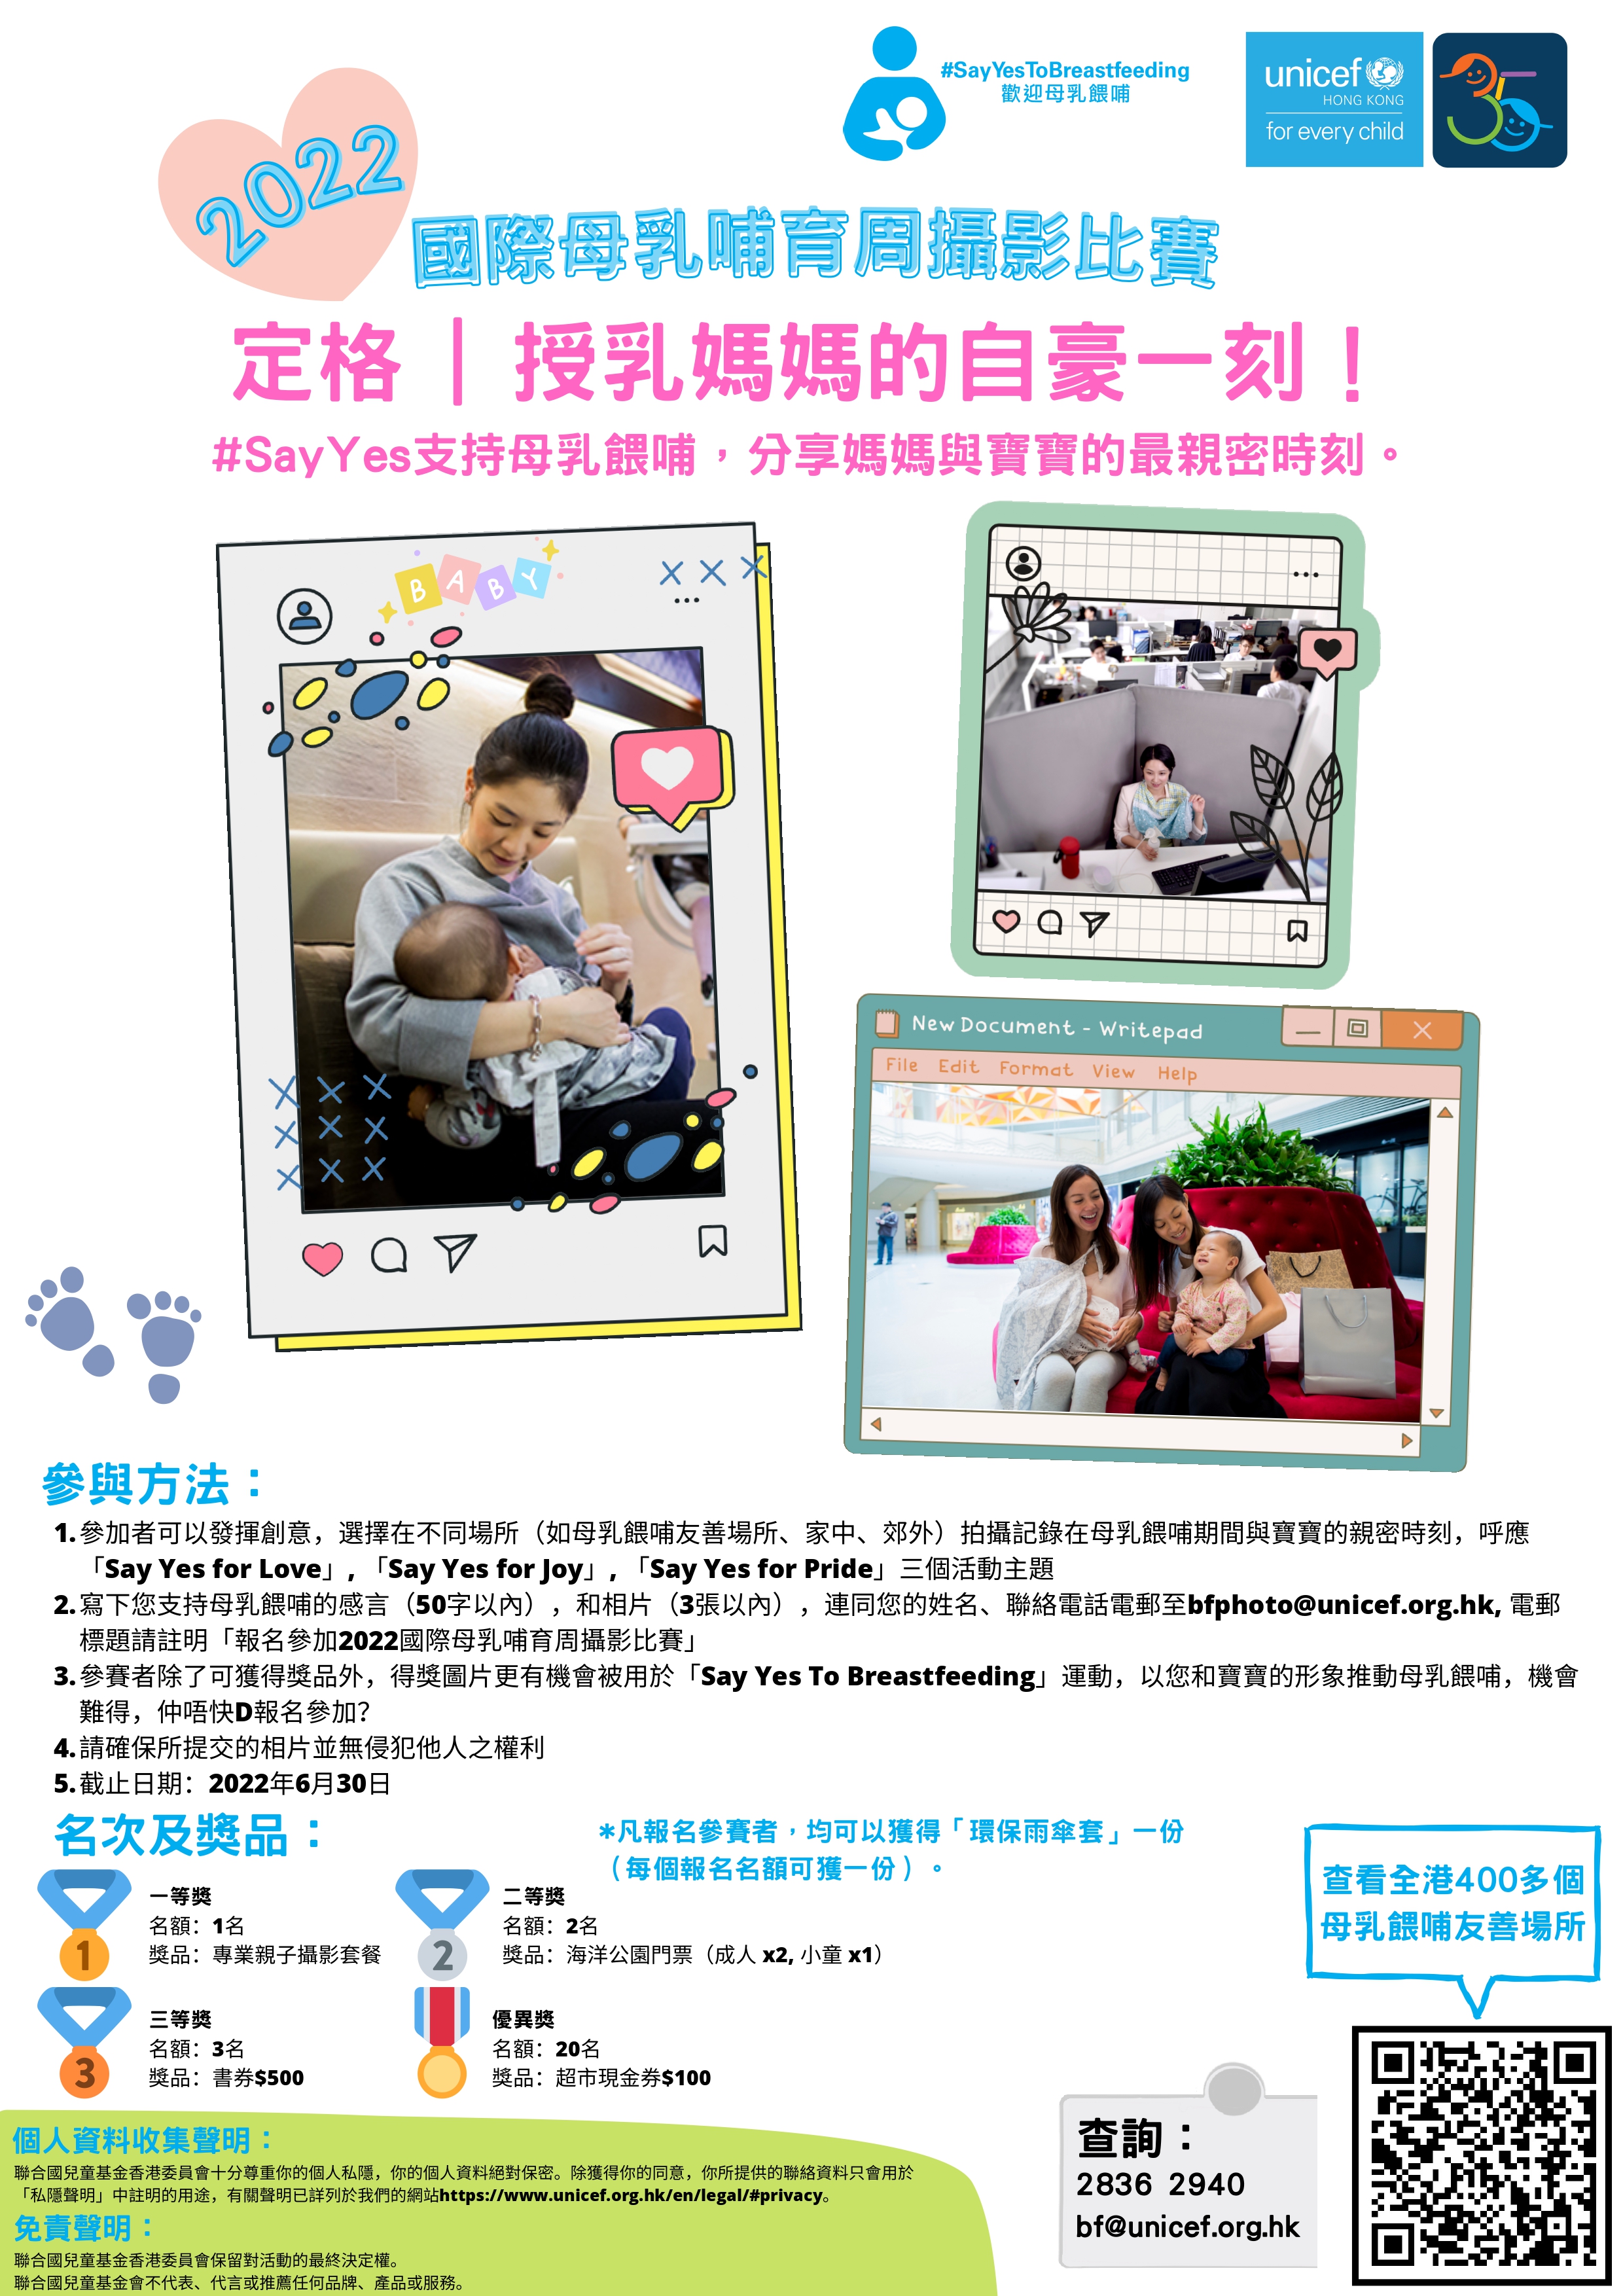 UNICEF HK 'Say Yes To Breastfeeding' Photo Competition Poster .Content same as text on this webpage.